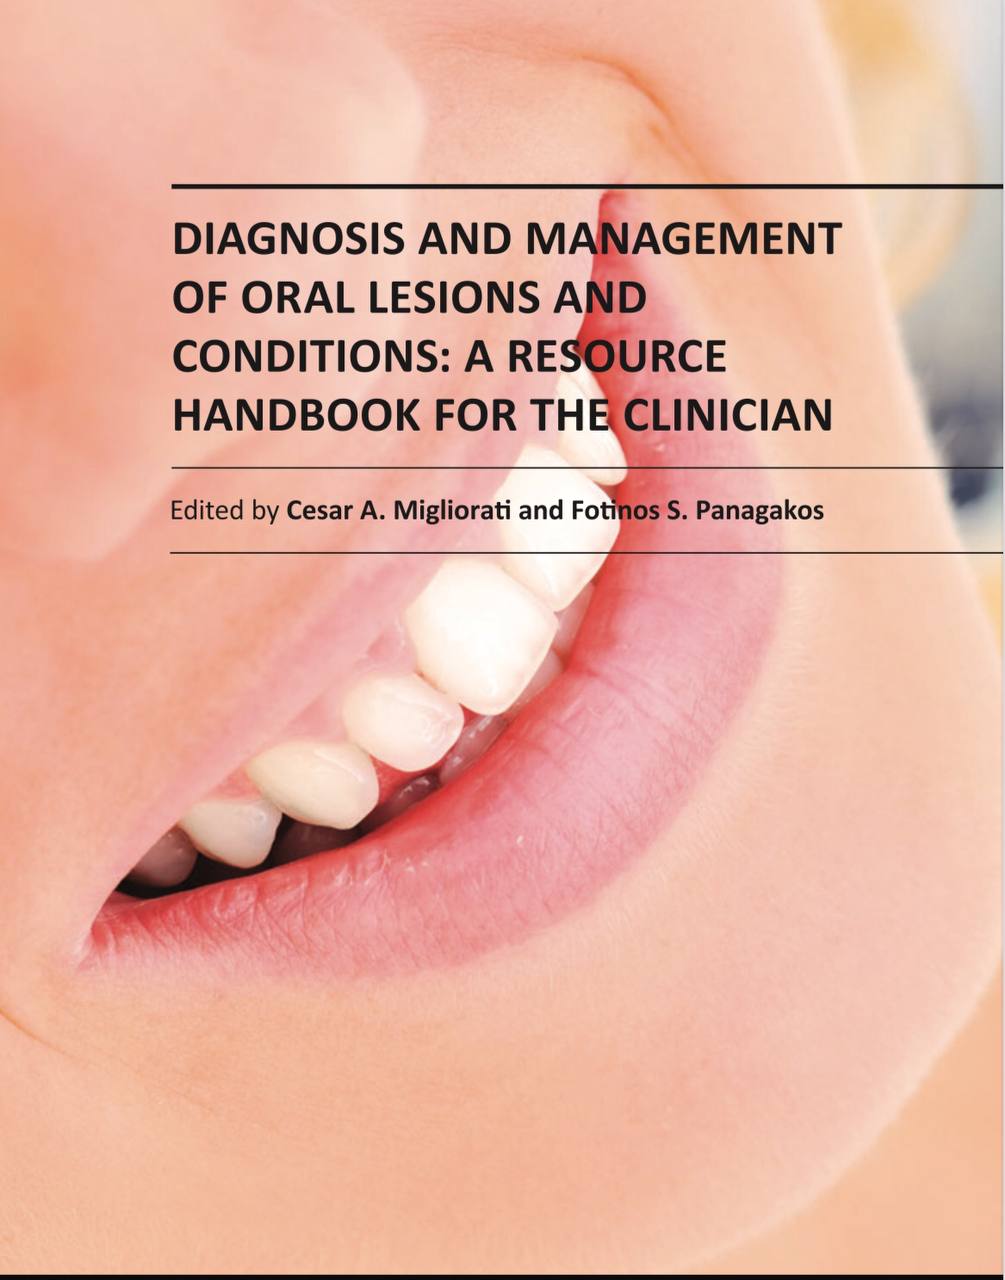 Diagnosis and Management of Oral Lesions